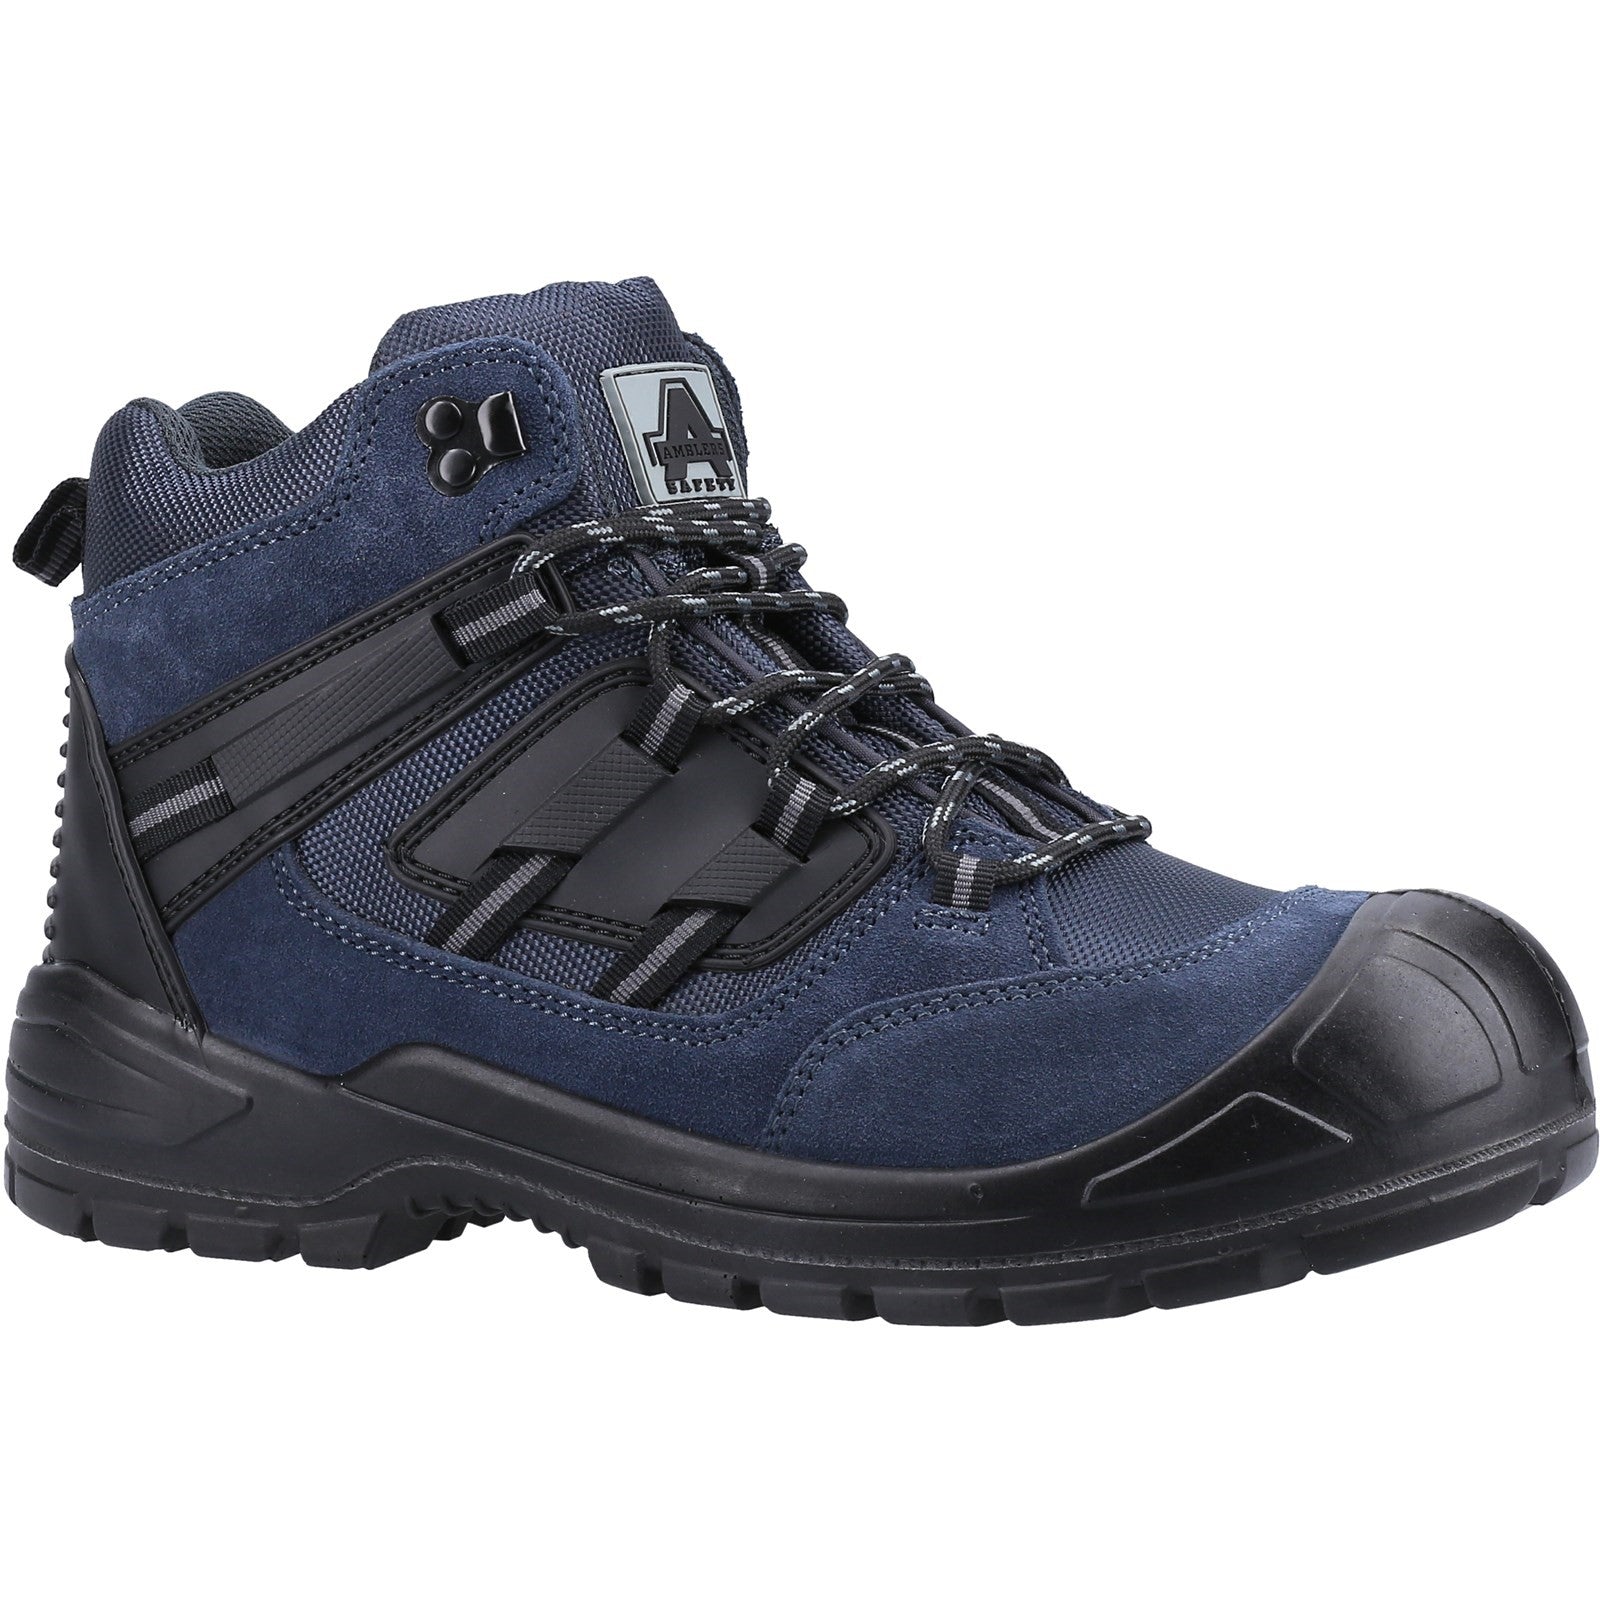 Amblers 257 Safety Boot - Navy